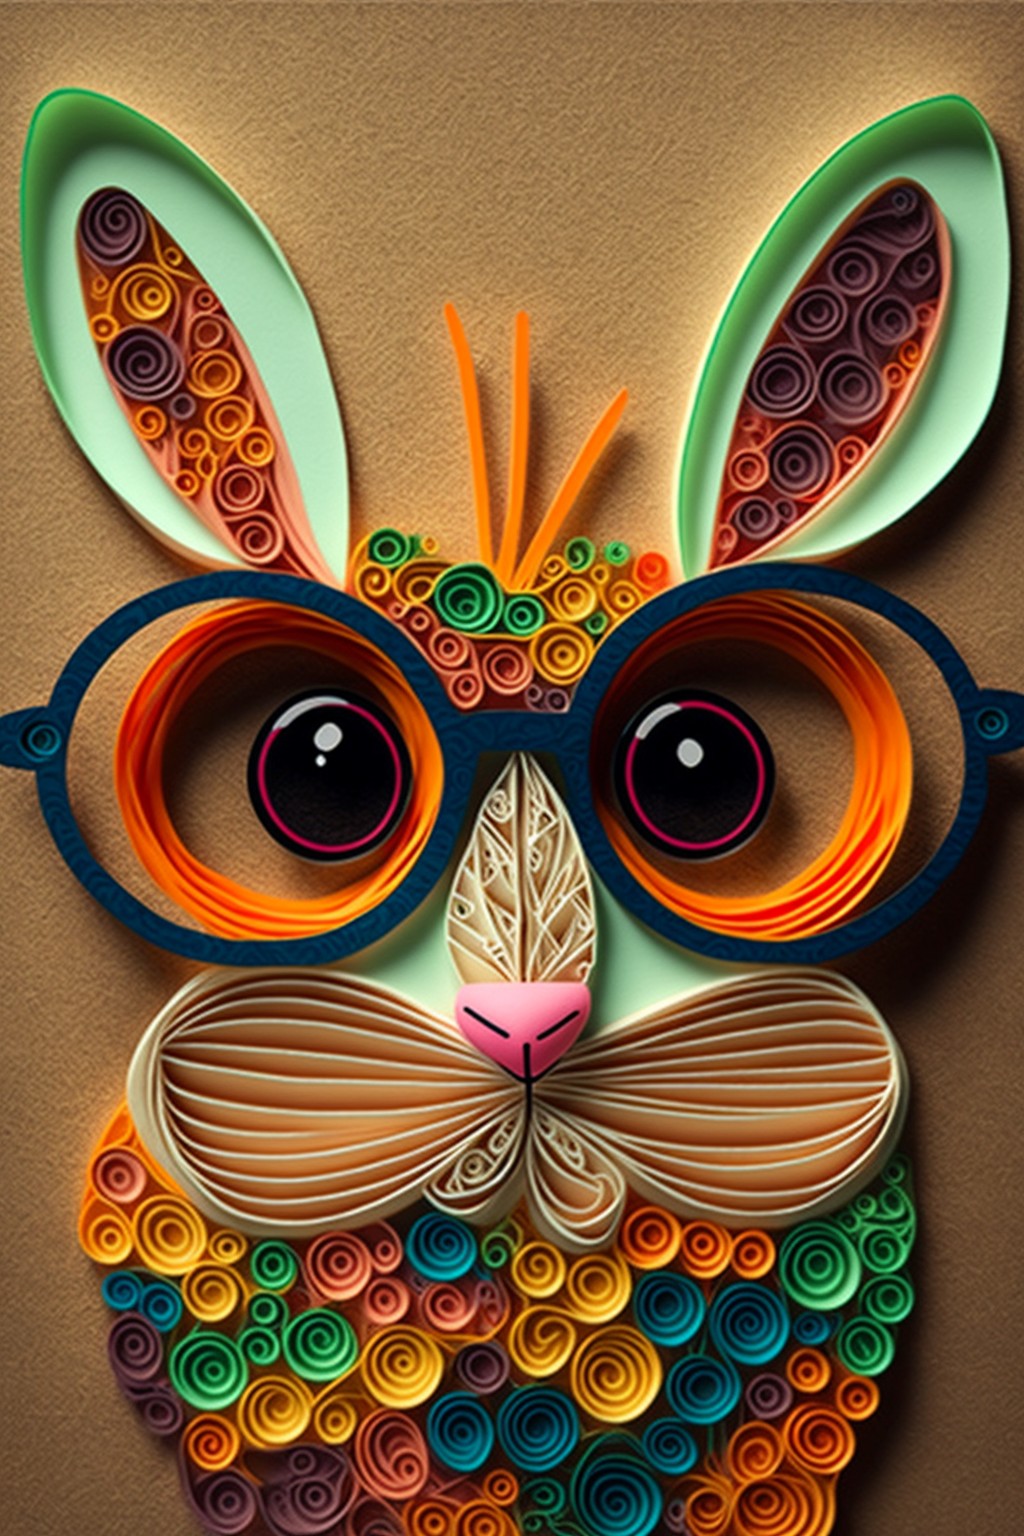 Rabbit paper cut avatar with glasses